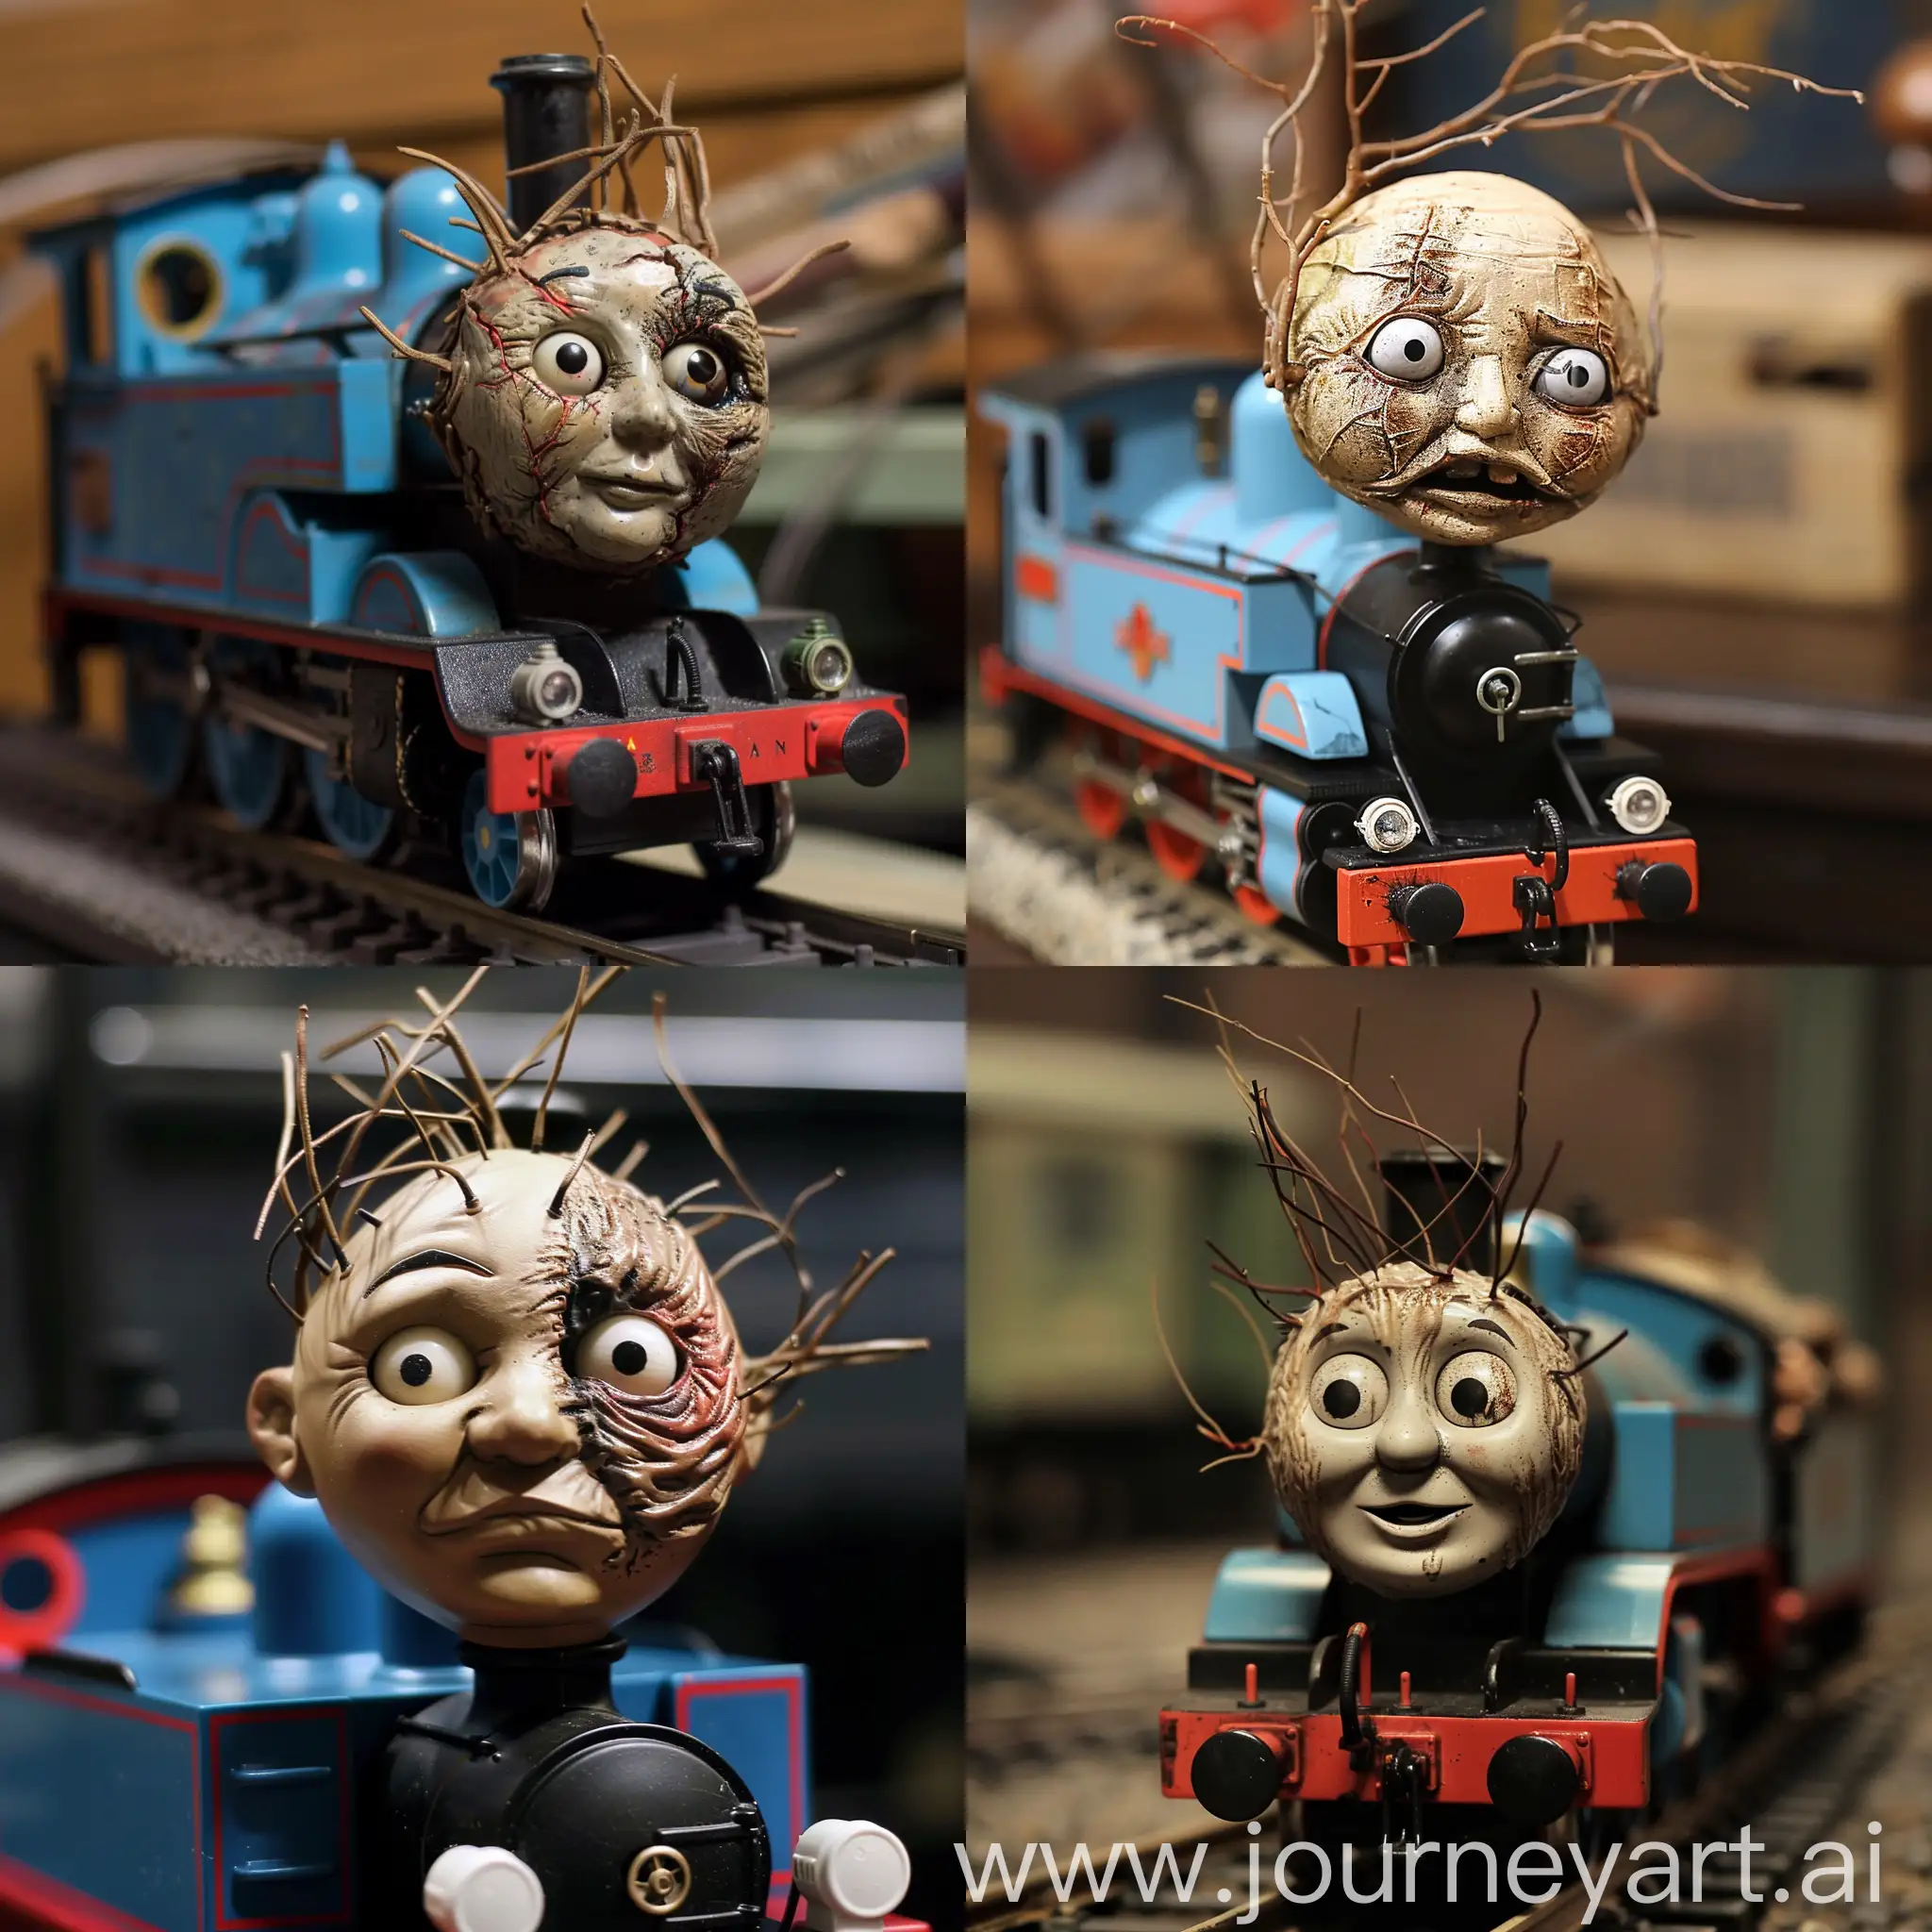 Grotesque-Thomas-the-Tank-Engine-Toy-with-Sticklike-Flesh